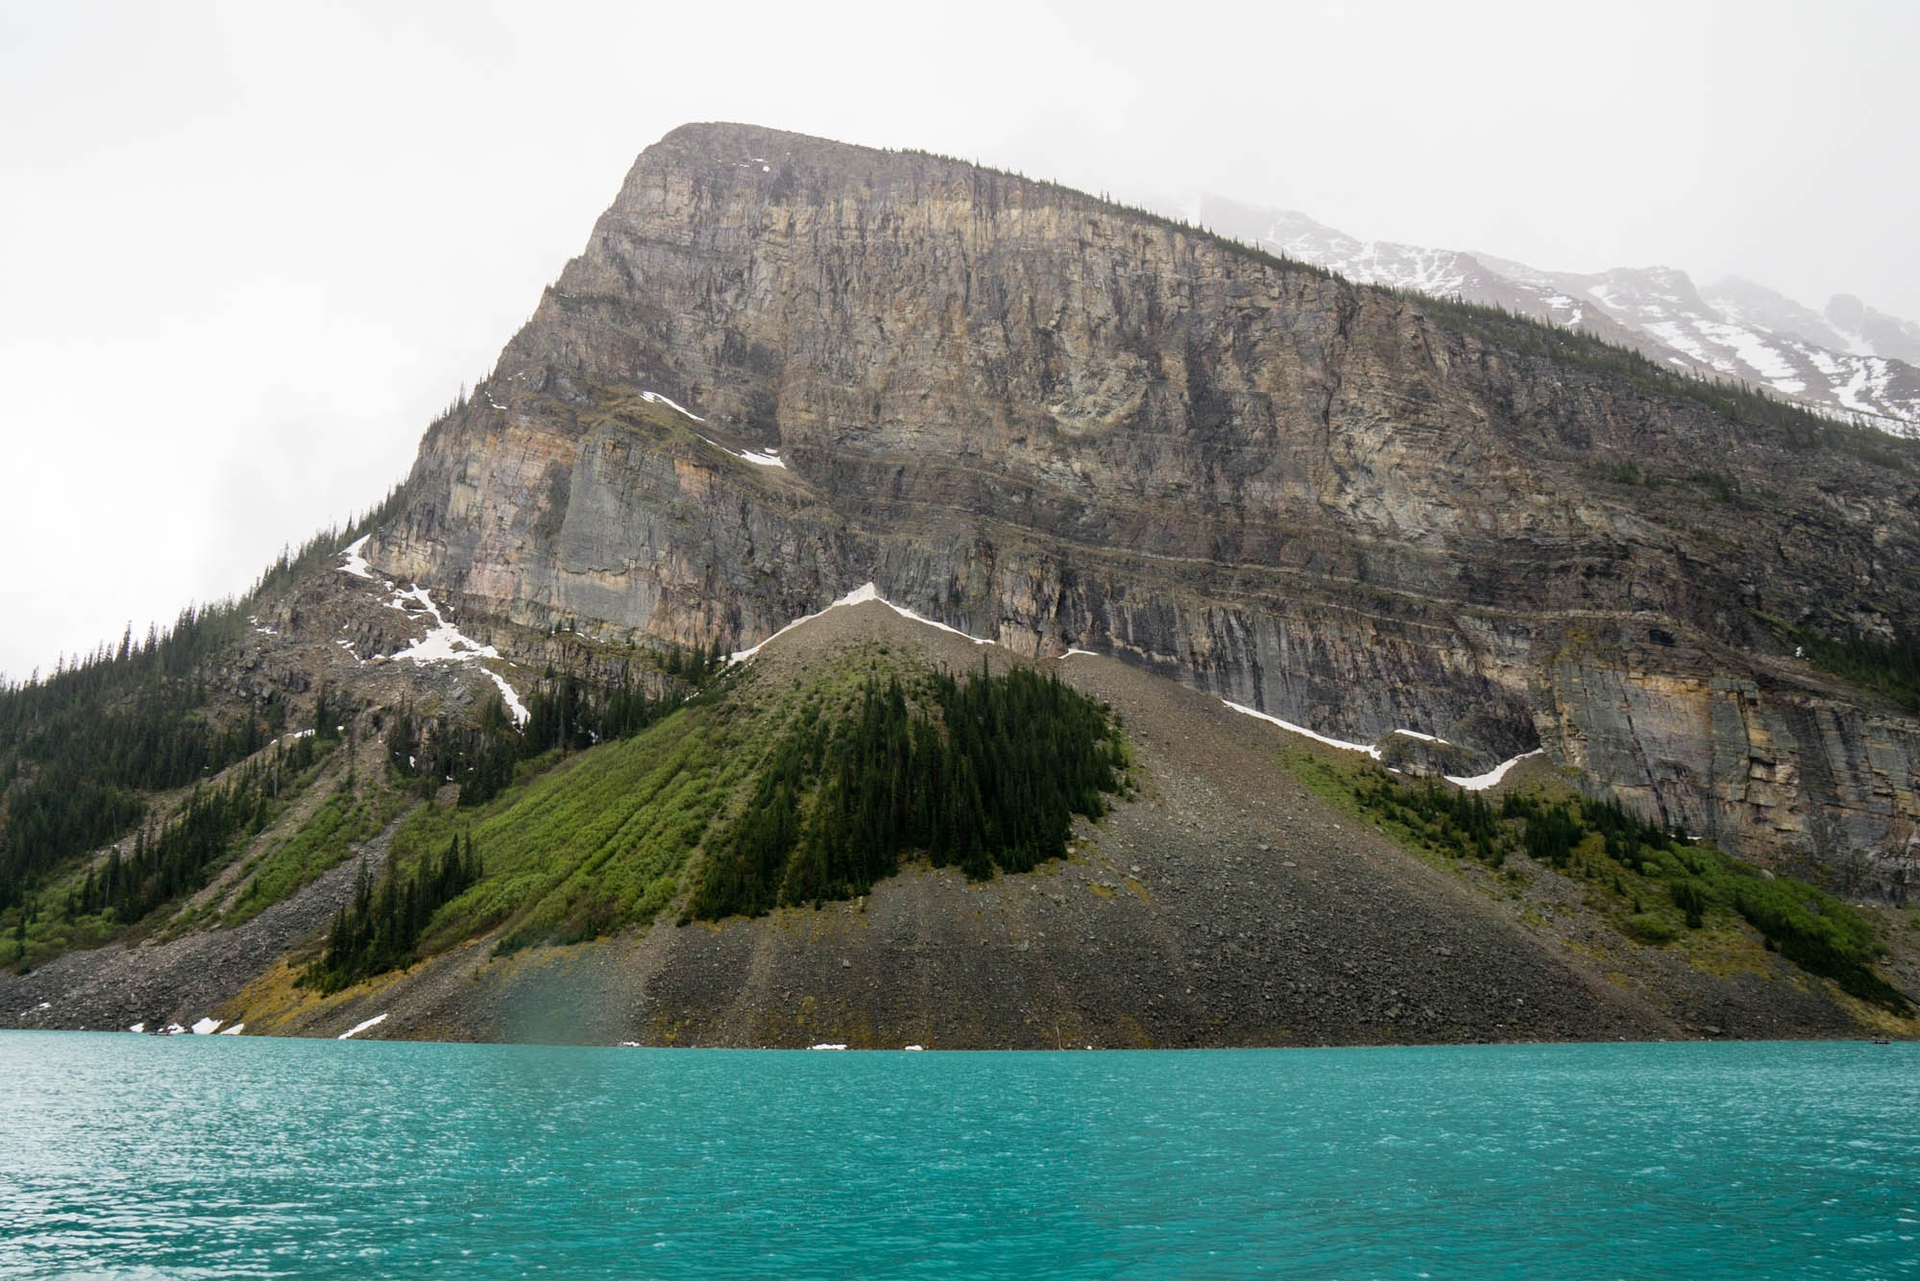 Banff, Our Canadian Road Trip